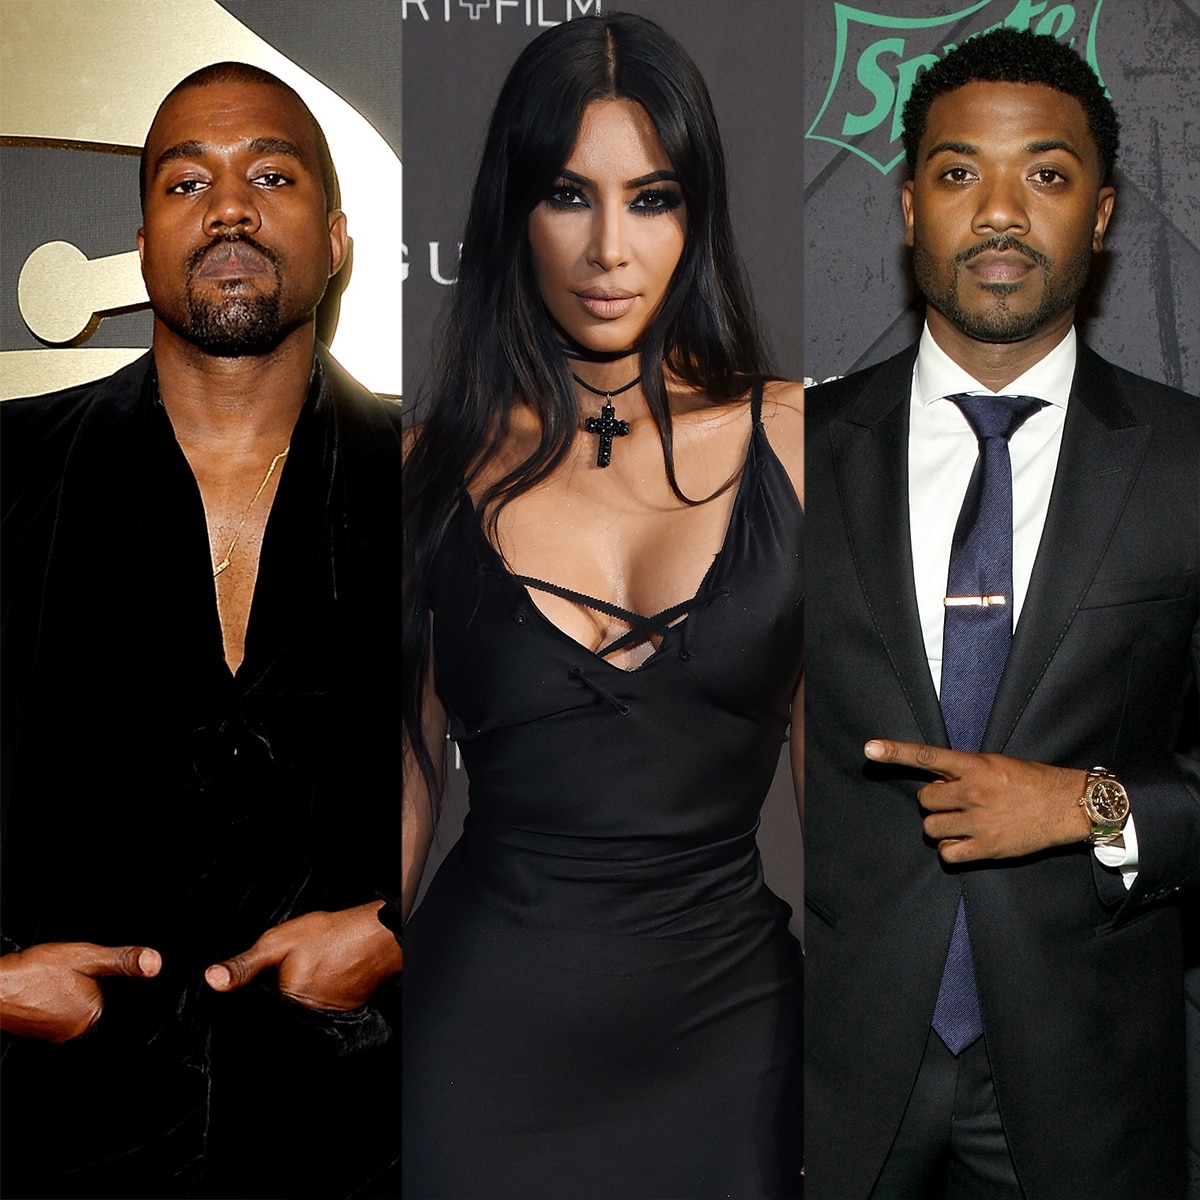 Kim Kardashian Responds to Yes Claim About Second Sex Tape With Ray J